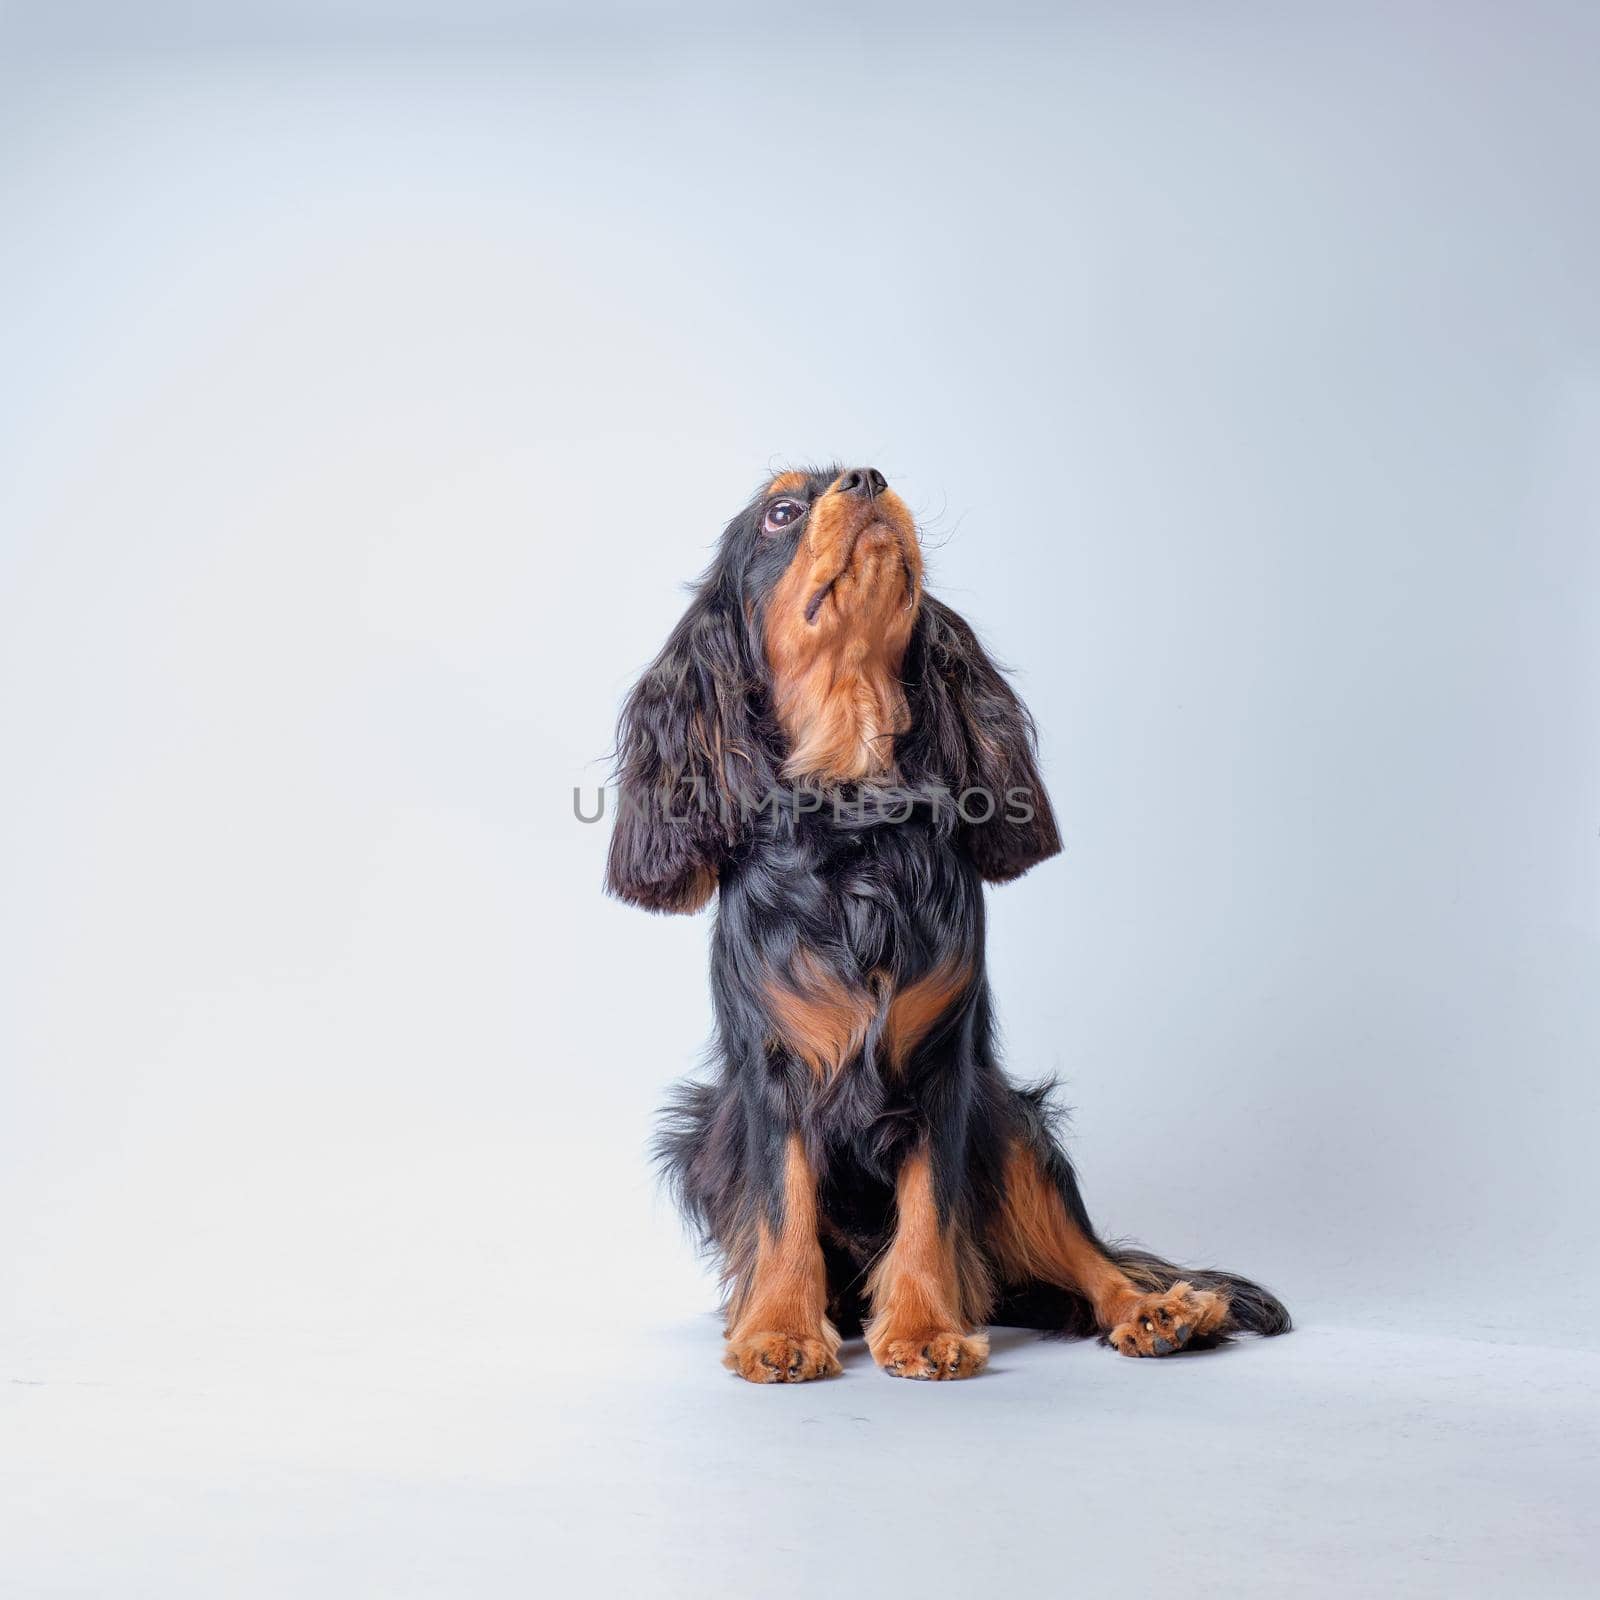 The Cocker Spaniel dog sits and looks up. Studio photo.